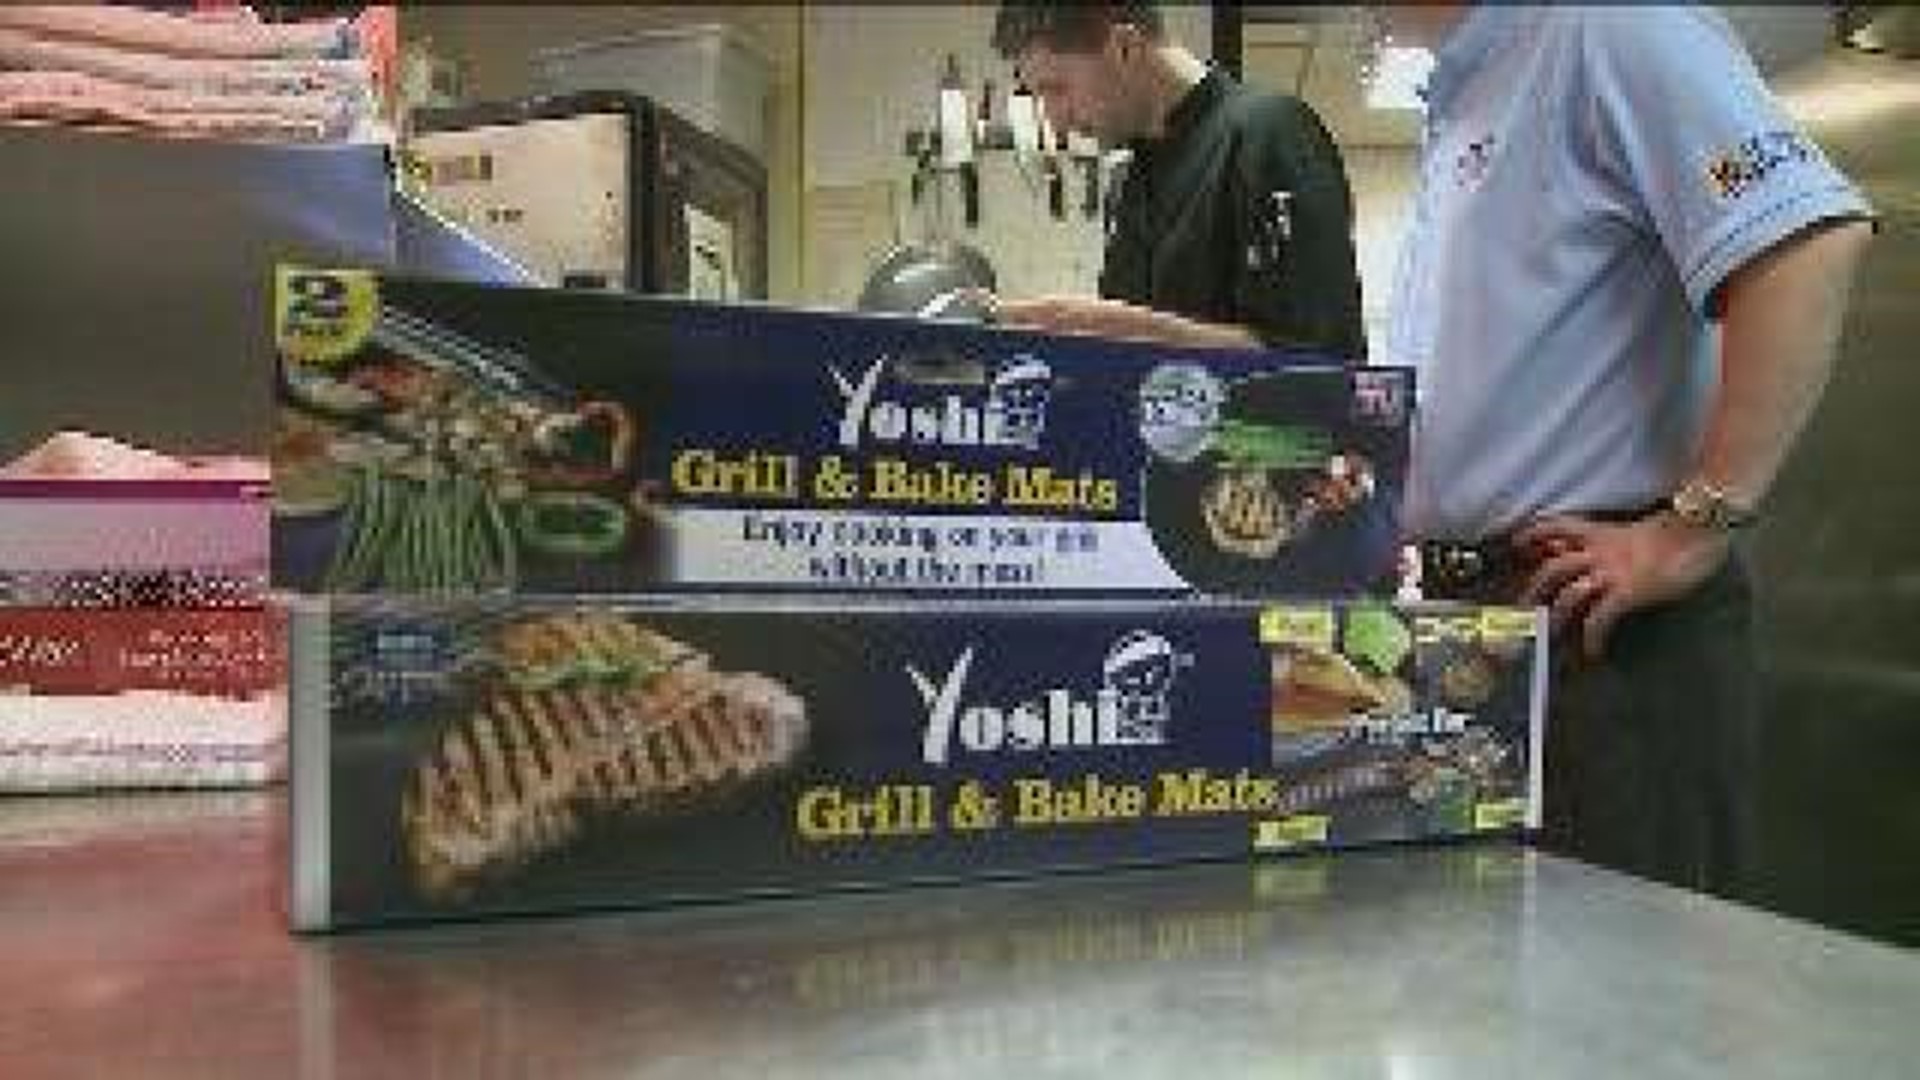 Does It Really Work: Yoshi Grill & Bake Mats